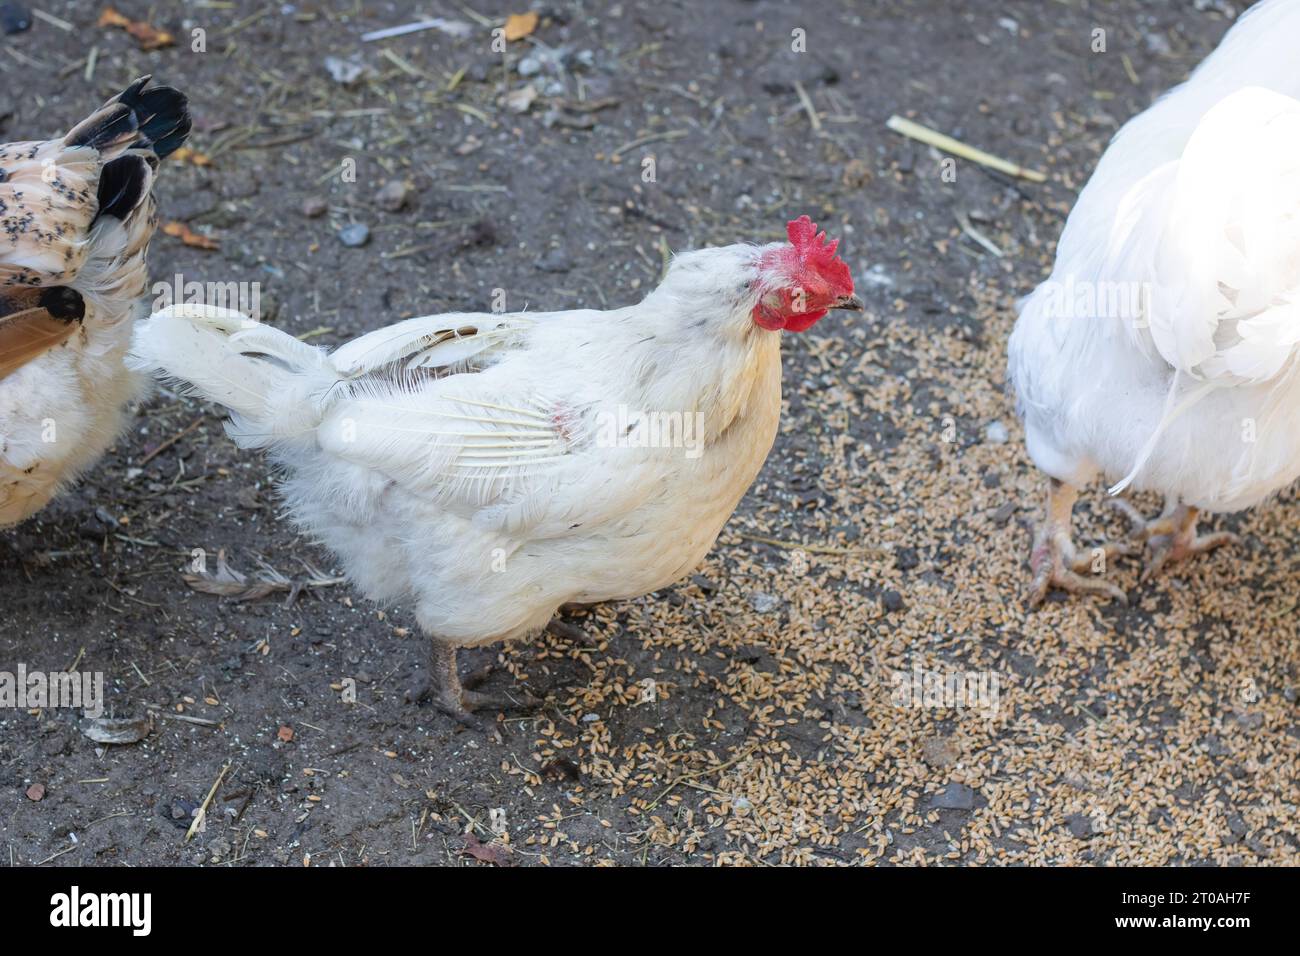 White plucked chicken in the yard close up Stock Photo